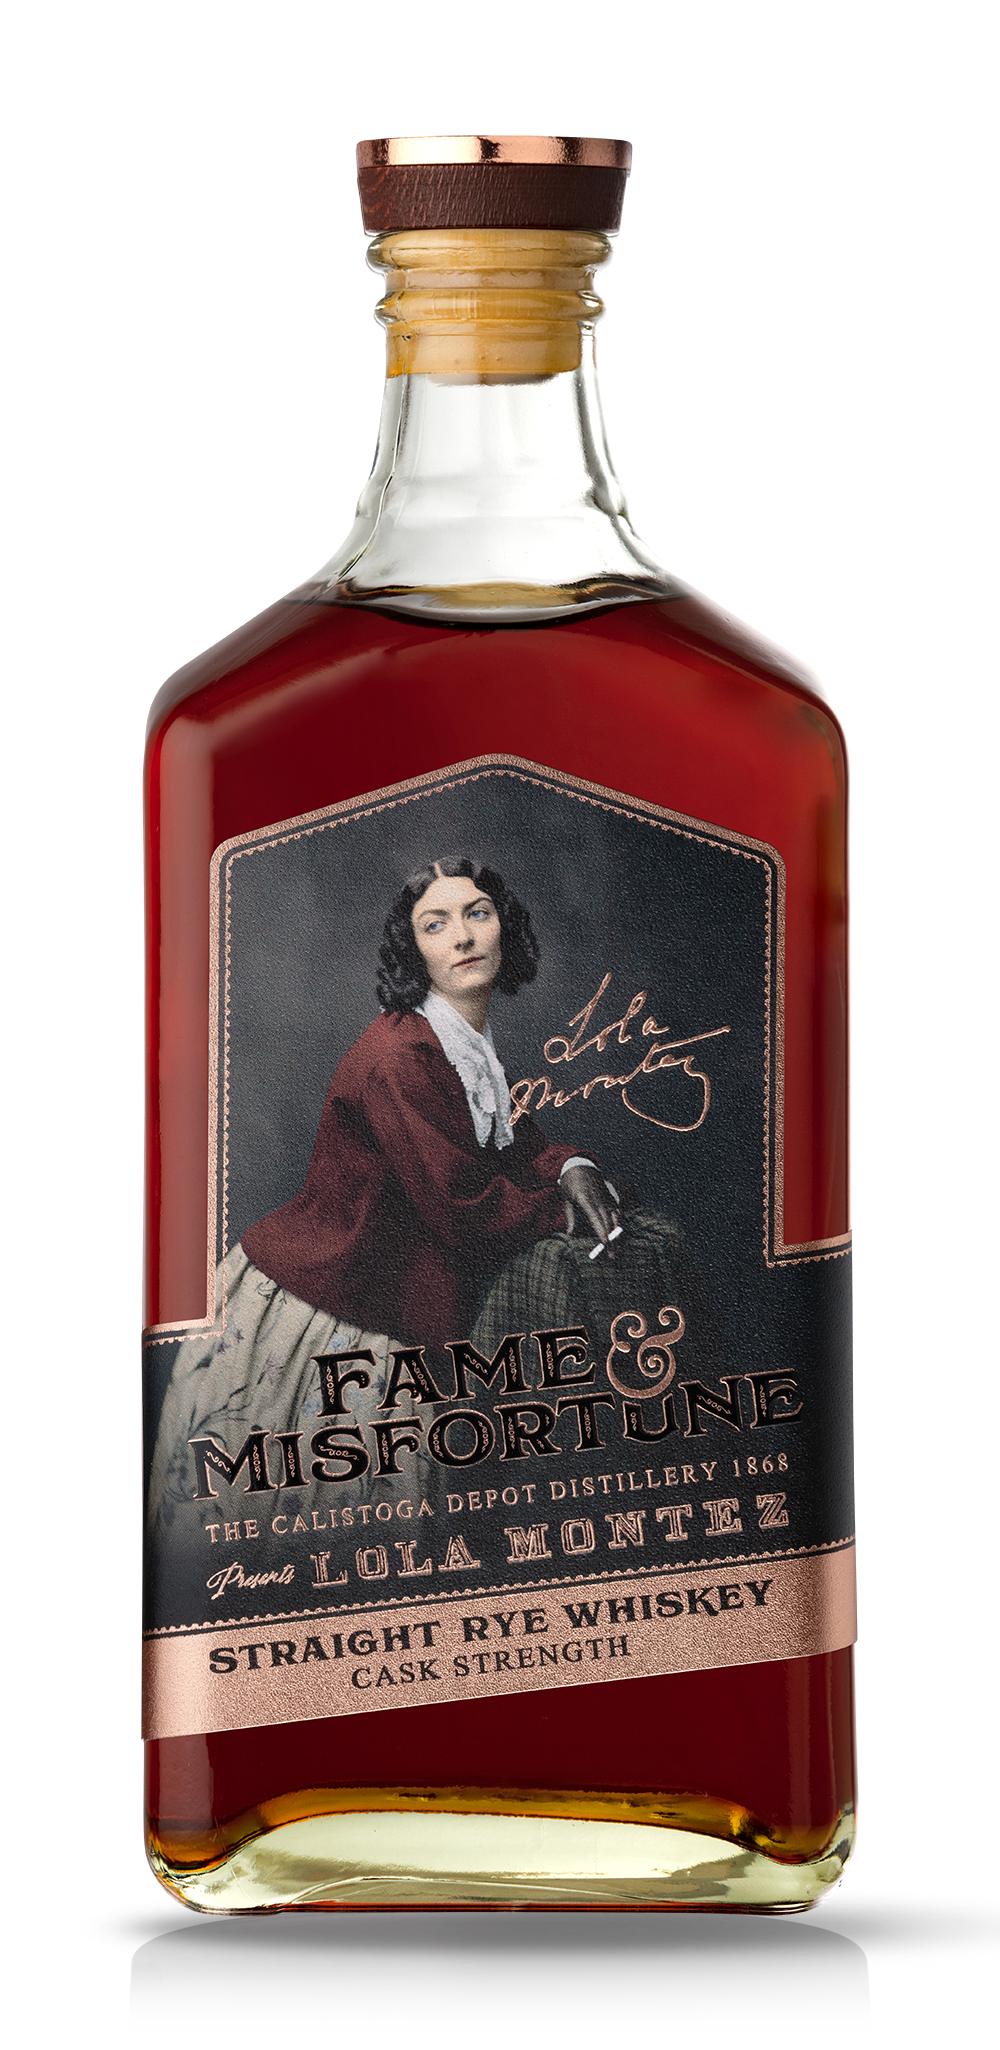 Image of a bottle of Fame & Misfortune Straight Rye Whiskey Cask Strength